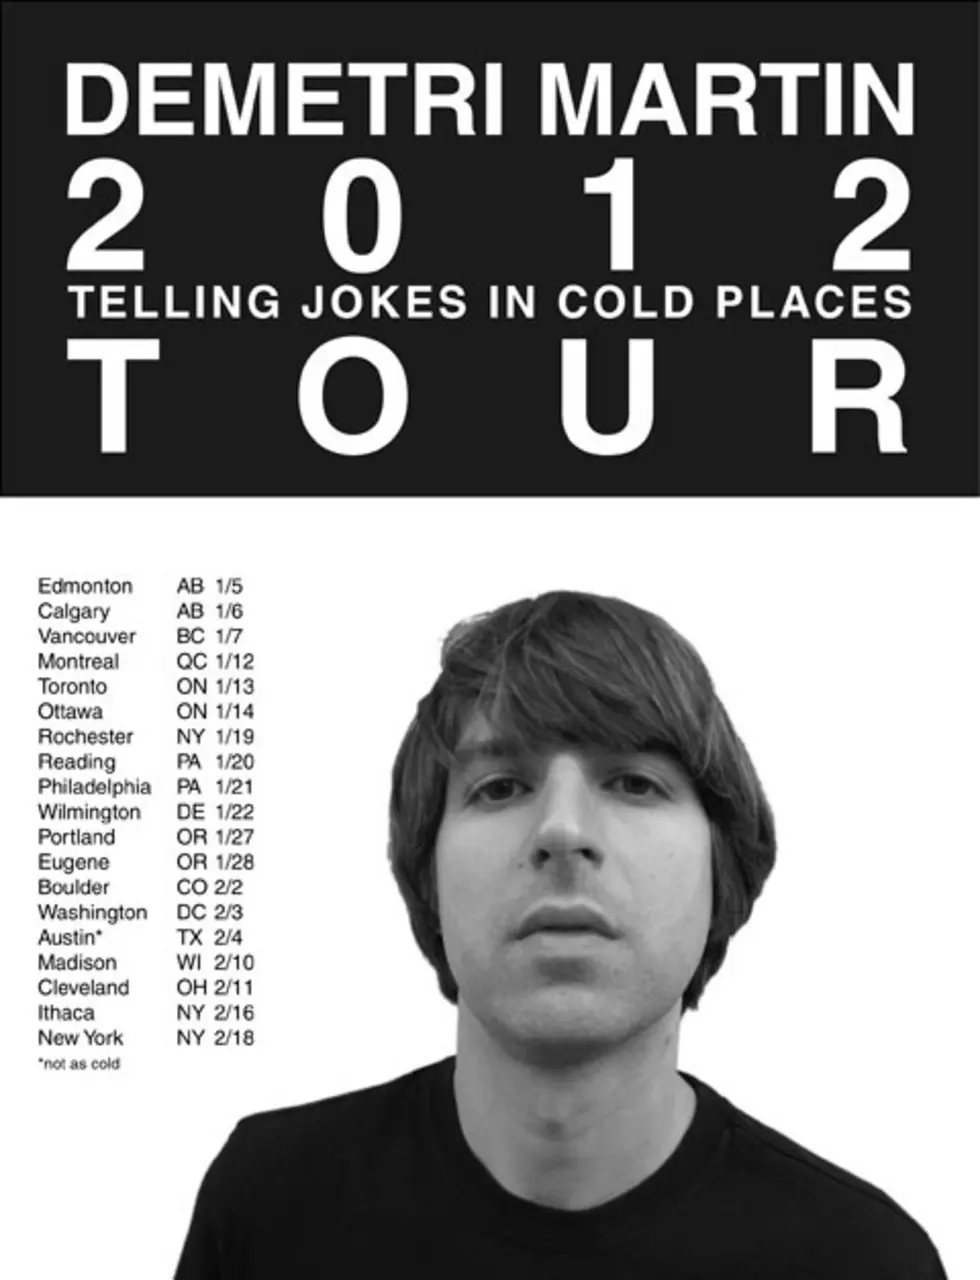 Demetri Martin playing not-as-cold Austin on cold places tour